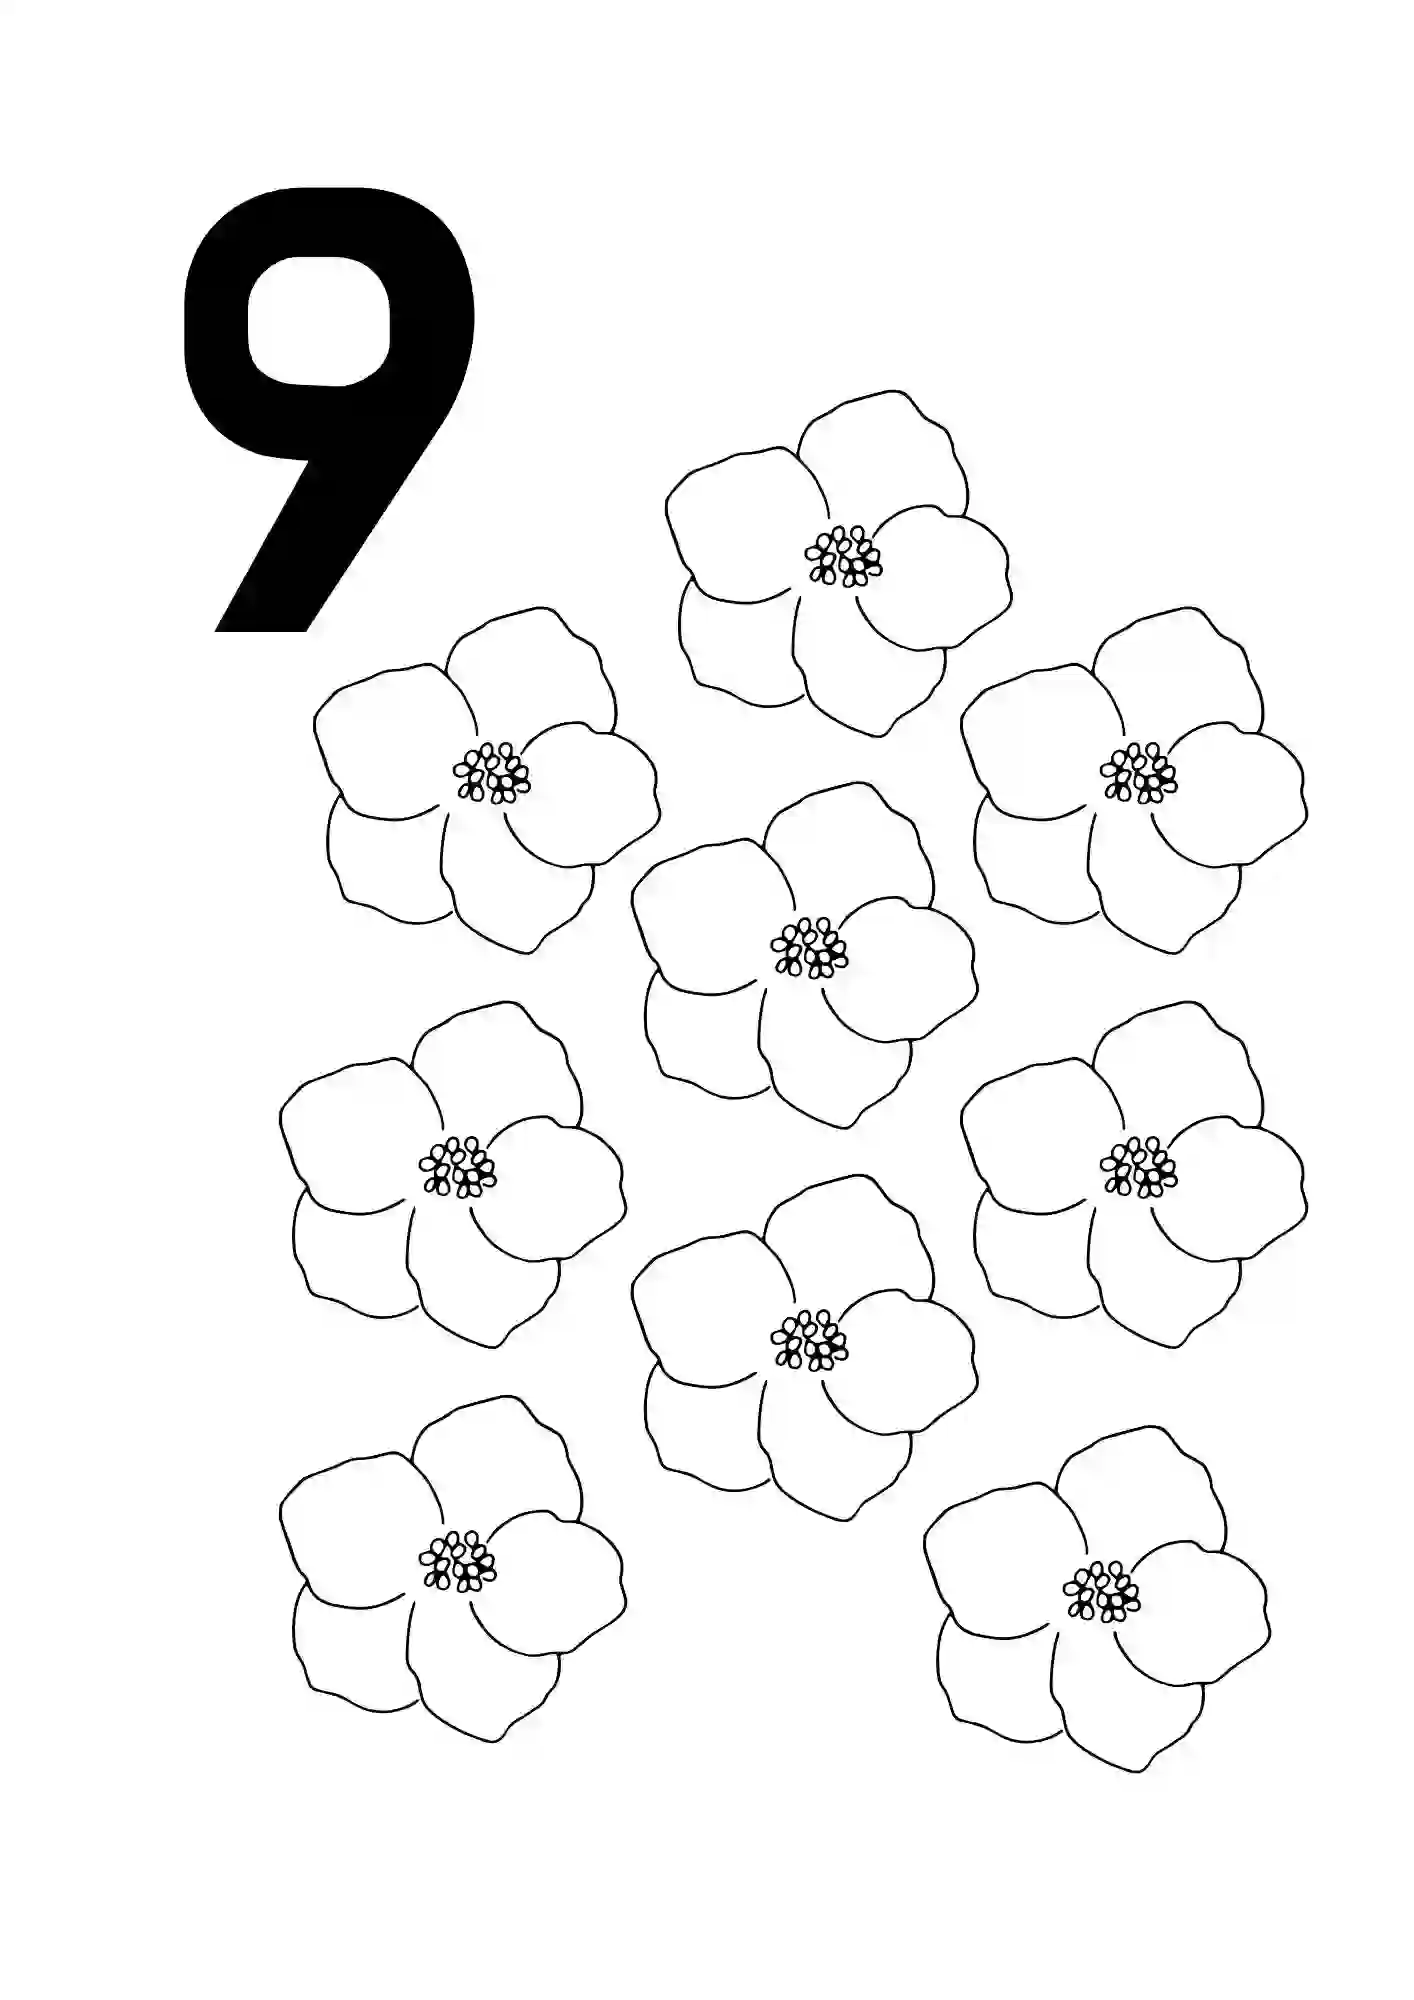 Count And Color Worksheets 1-10 (NUMBER 9)